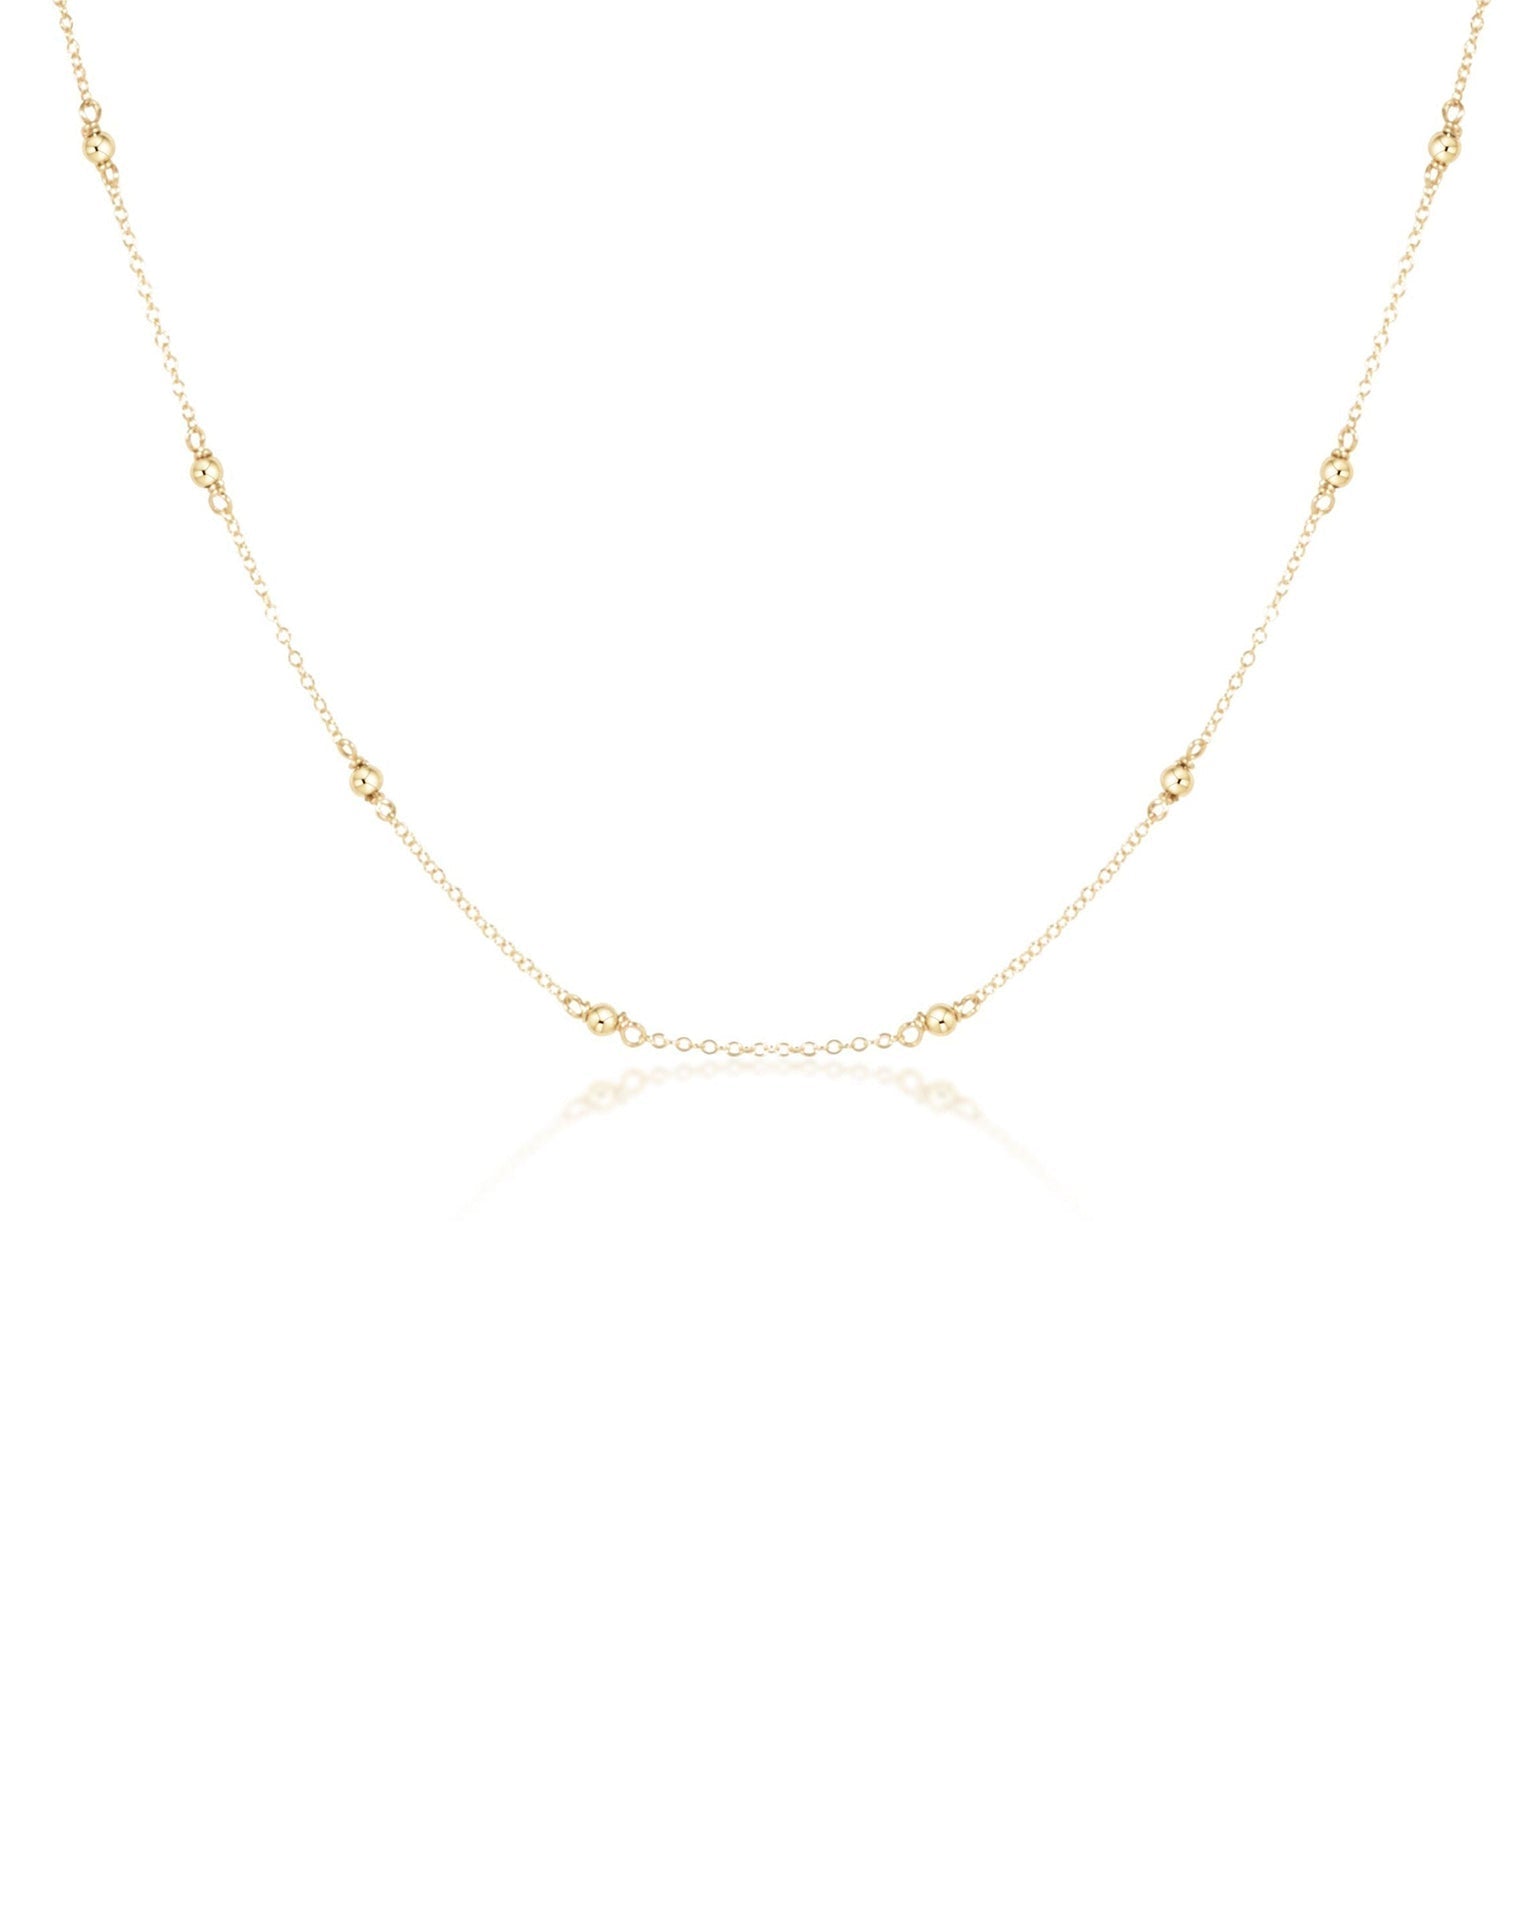 15" Choker Classic Gold 2.5mm Bead Necklace